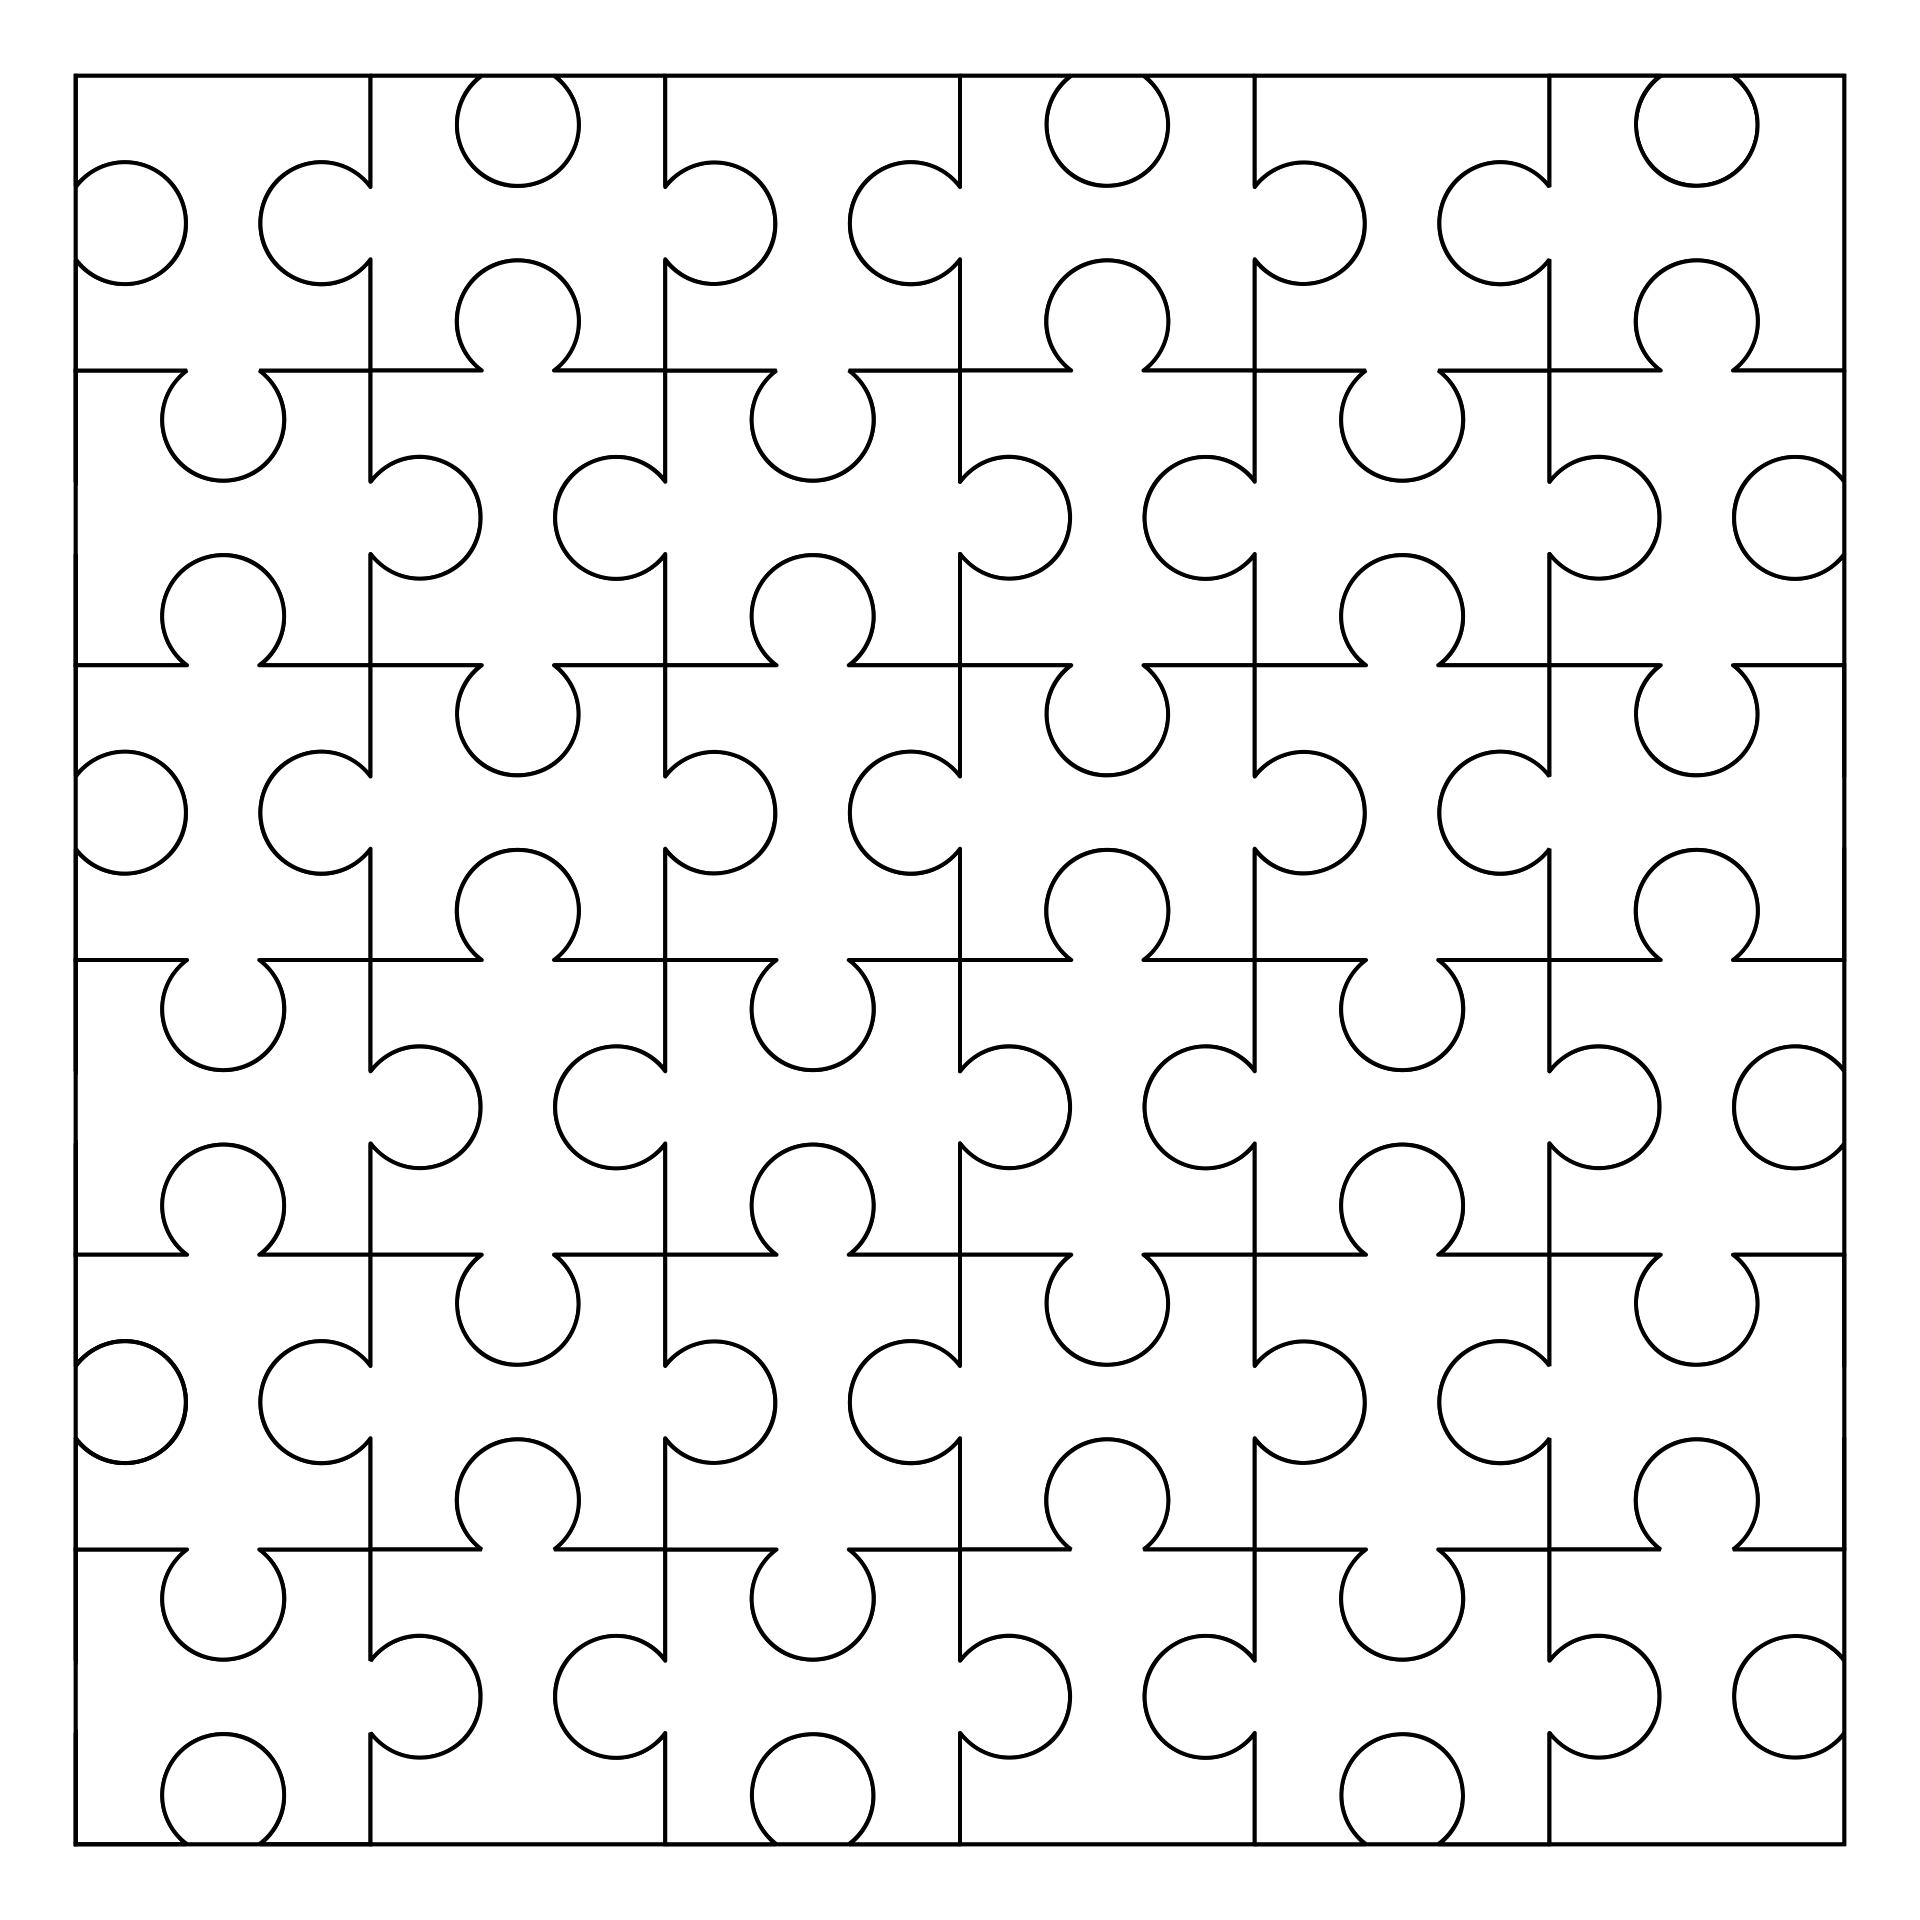 7 Best Images of 9 Piece Jigsaw Puzzle Template Printable 9 Piece